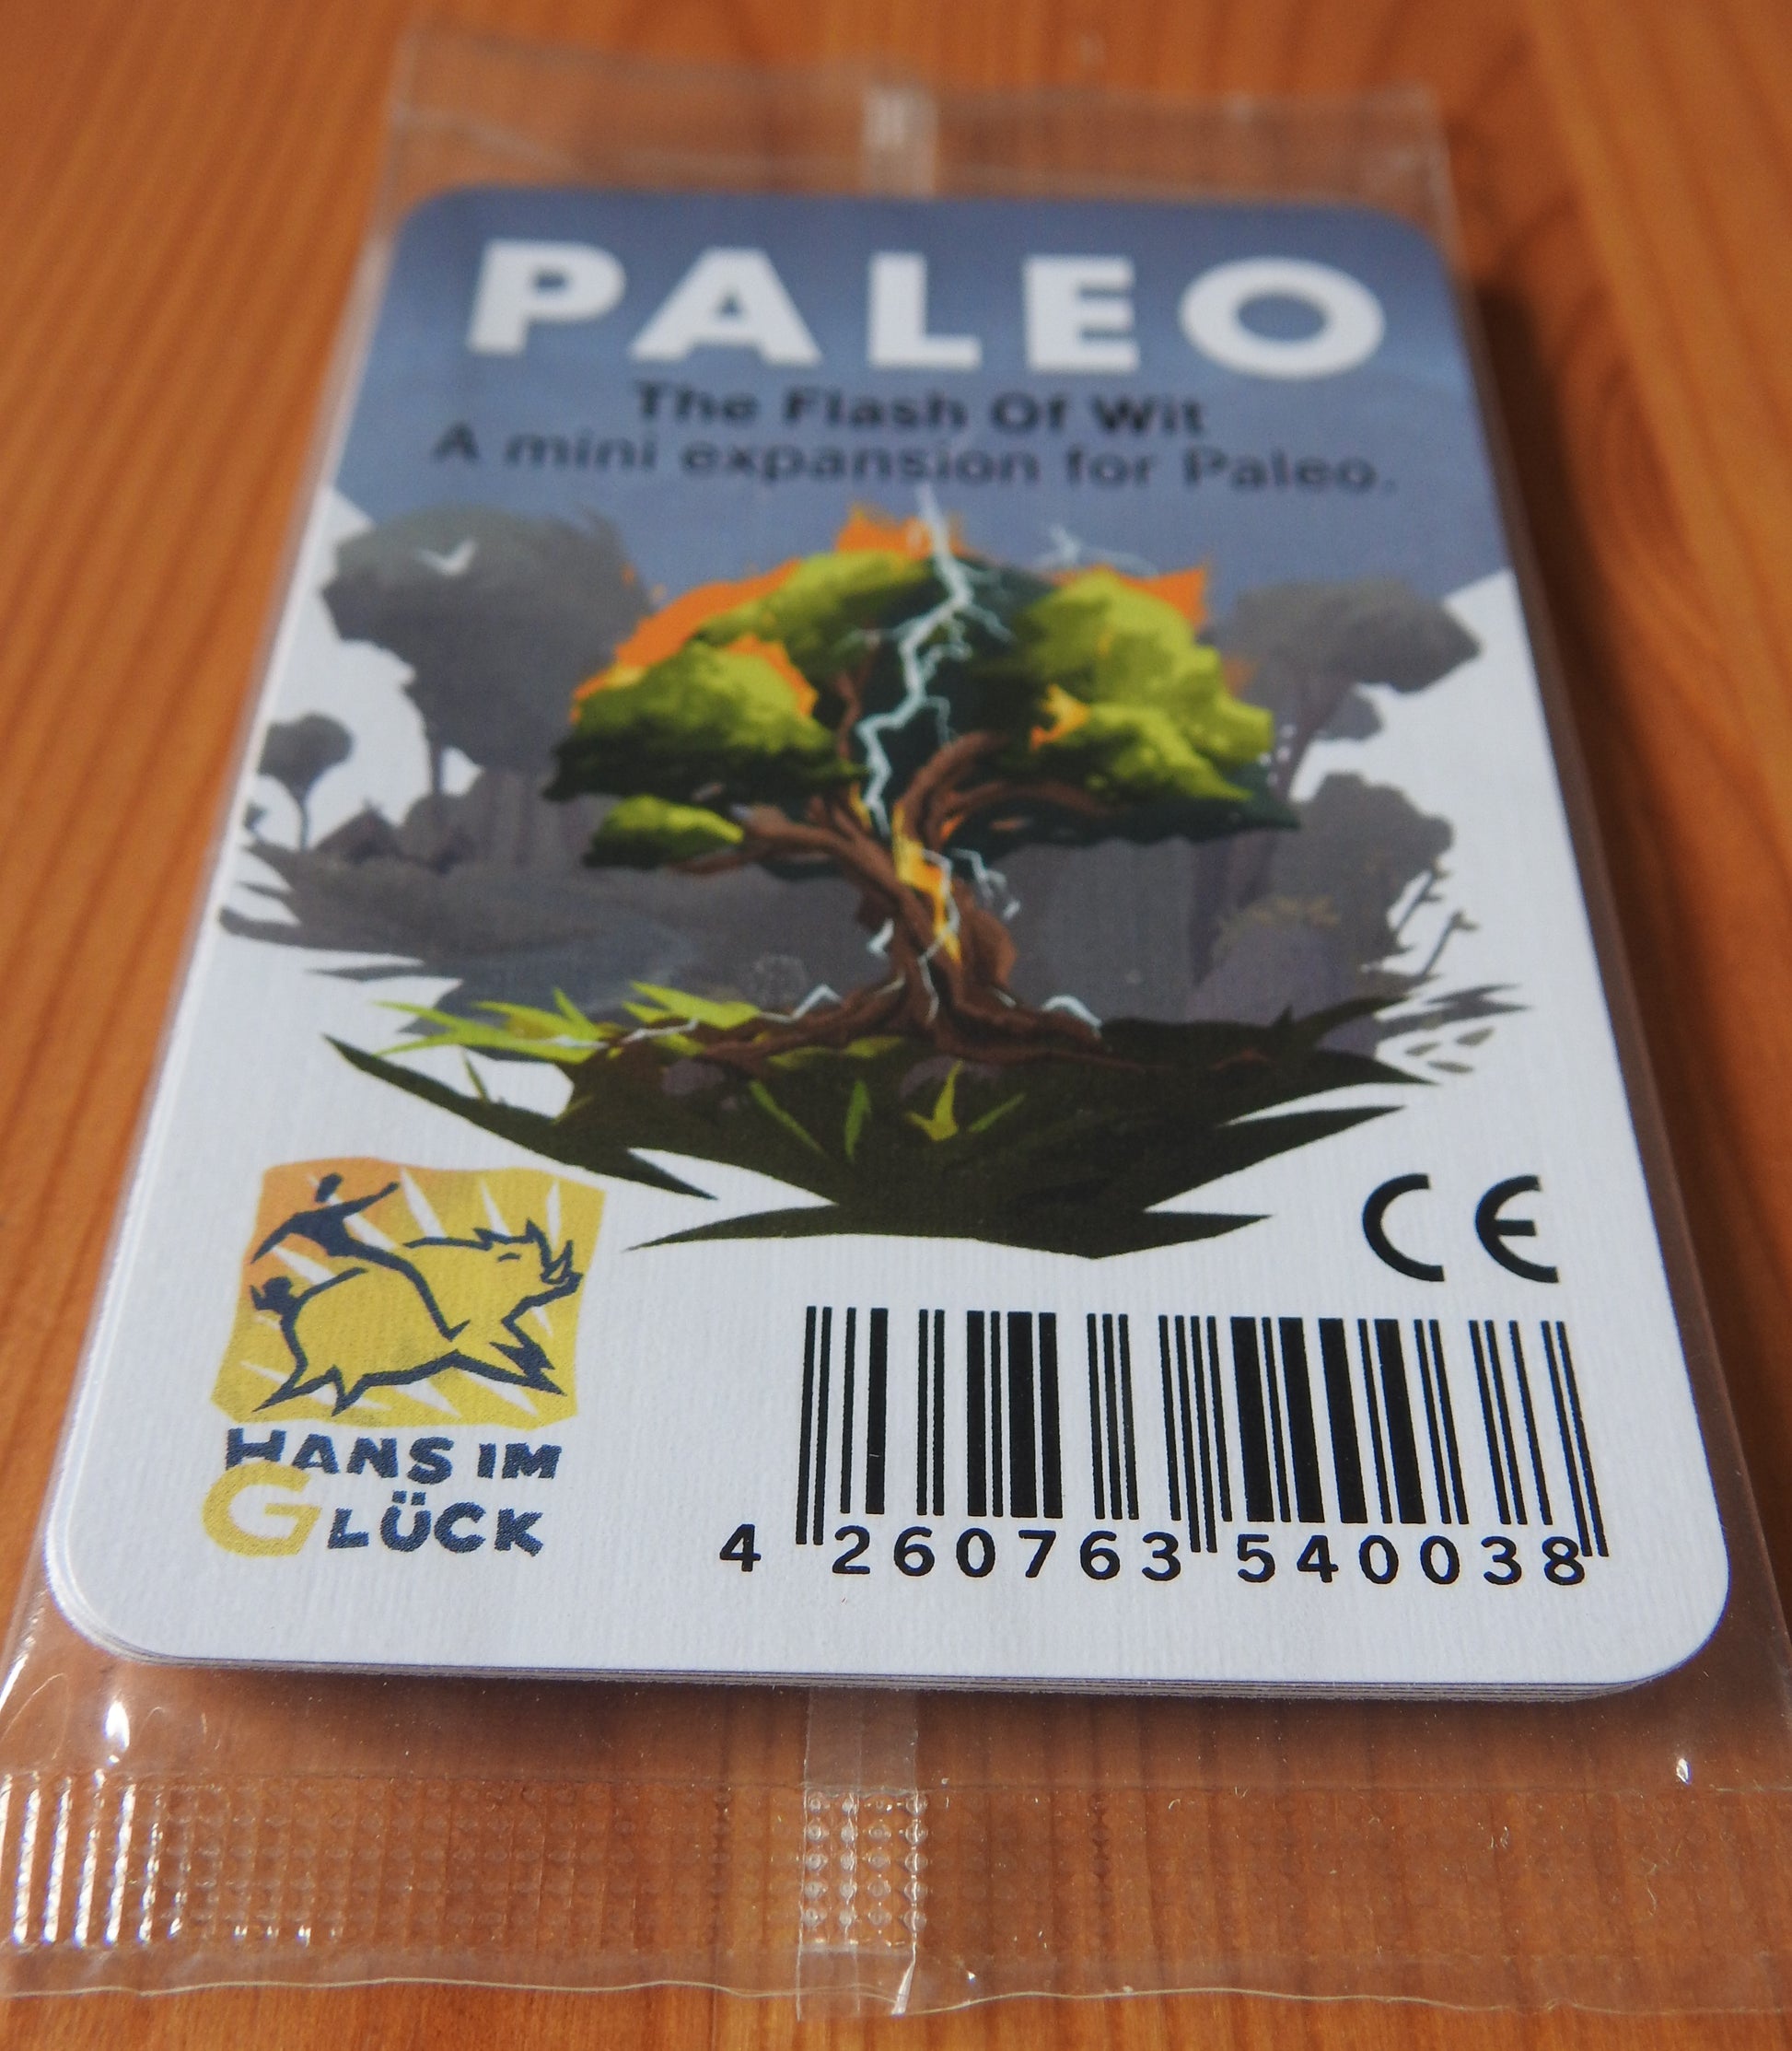 View lower down of the small deck of cards for this Paleo Flash of Wit mini expansion.